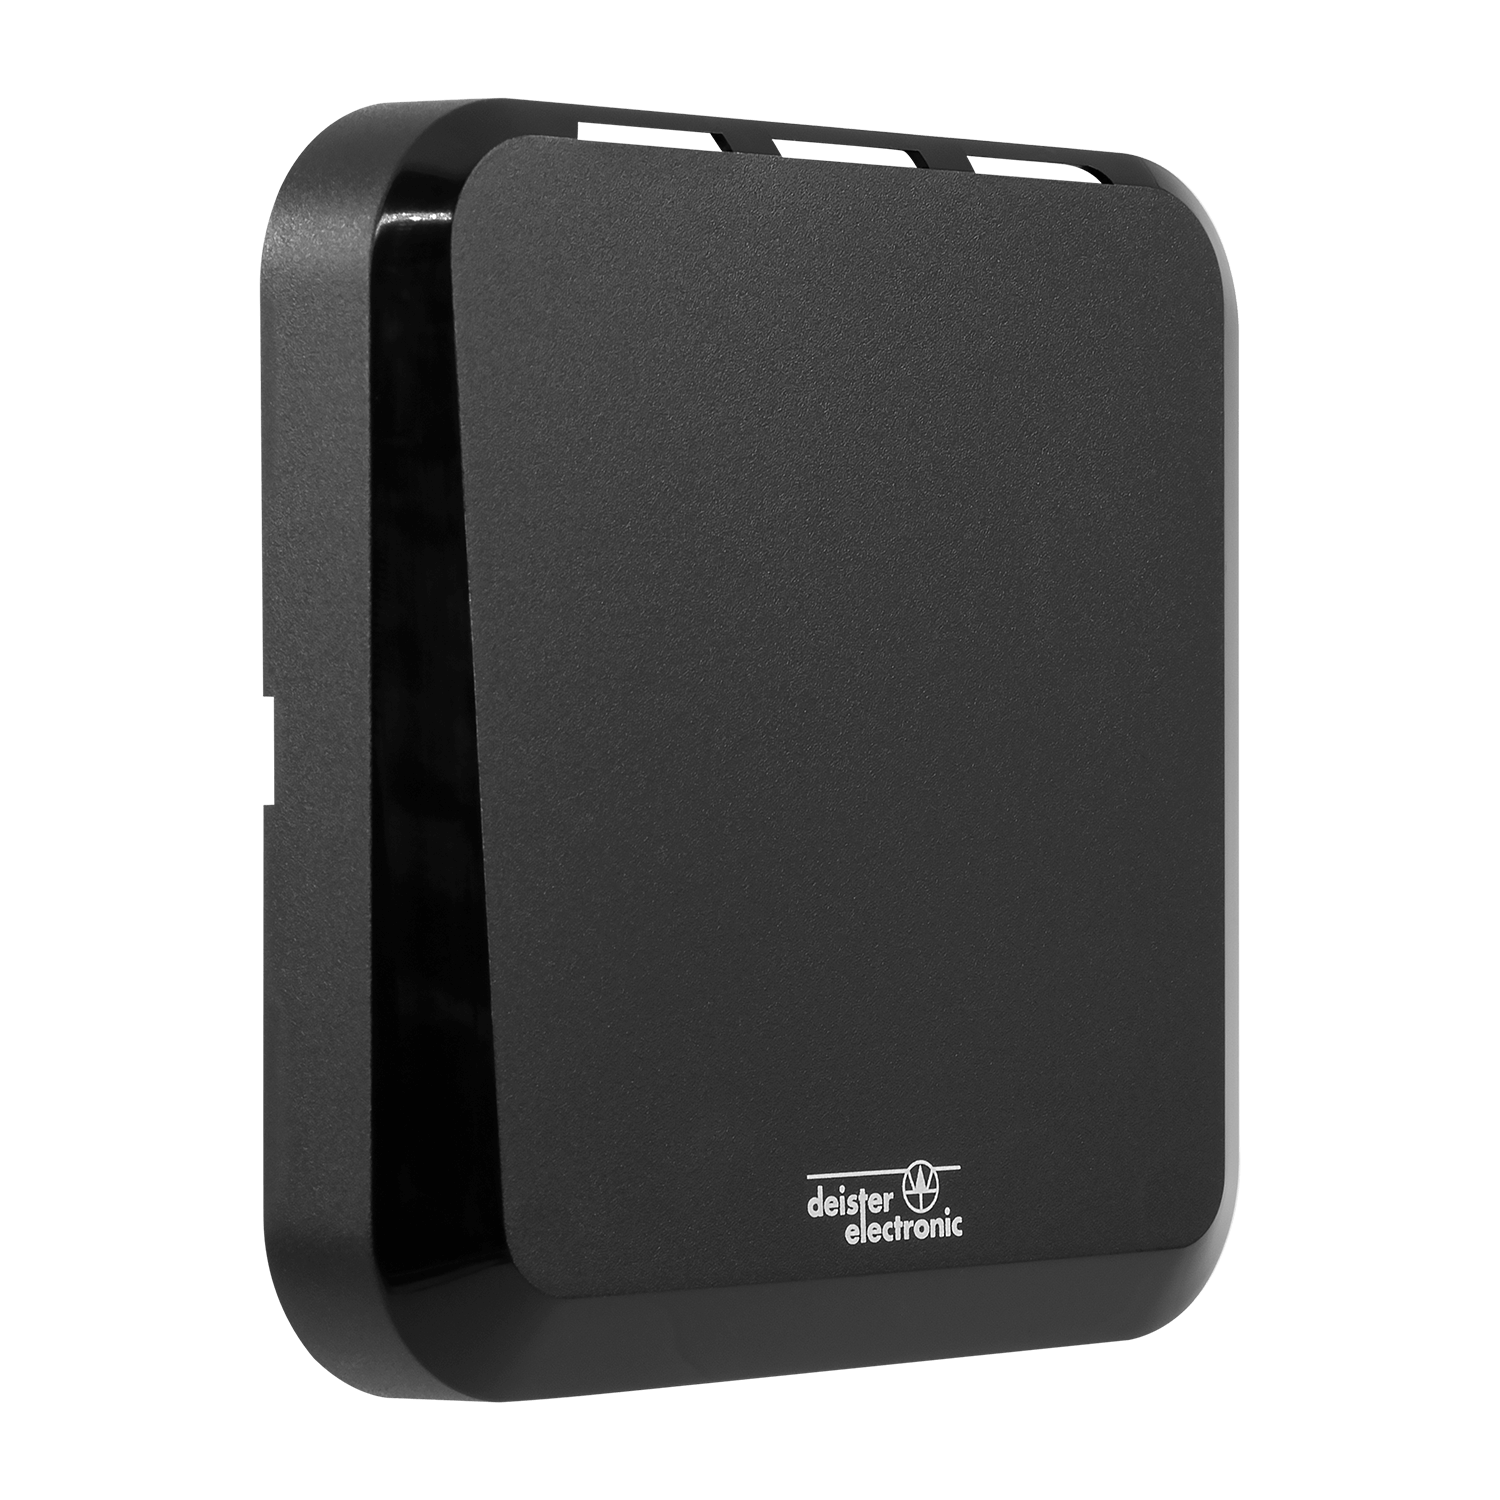 CCS 6 black cover for access control reader, left view